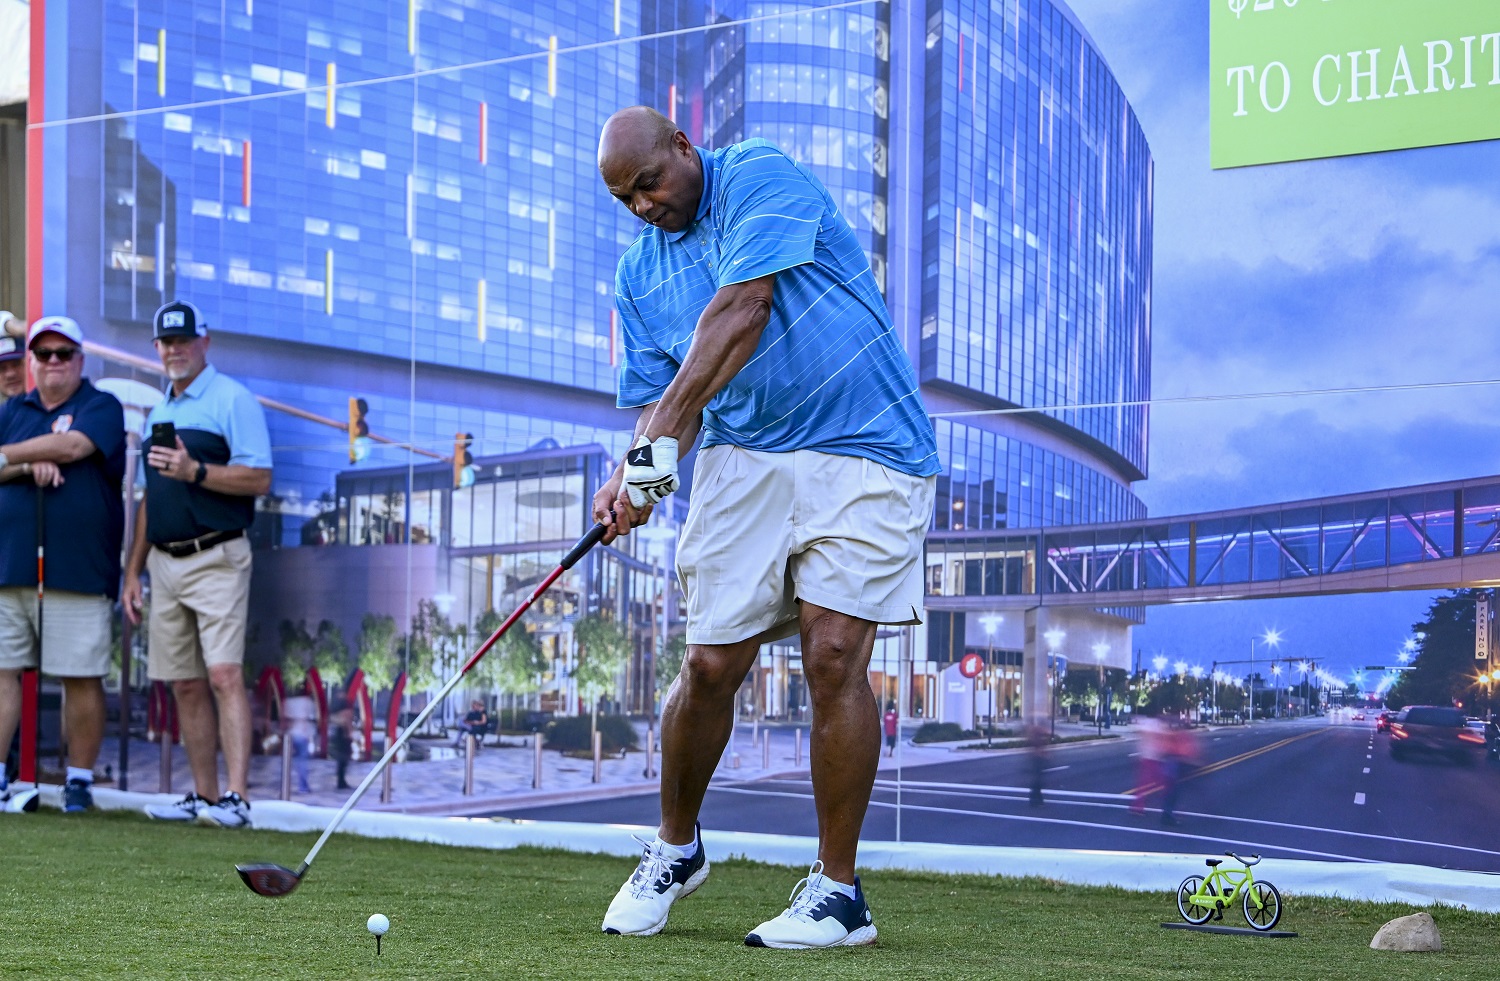 Charles Barkley hits his tee shot at the NCR Pro-Am prior to the PGA Tour  Champions Regions Tradition at Greystone Golf and Country Club on May 11, 2022 in Birmingham, Alabama. | Tracy Wilcox/PGA Tour via Getty Images